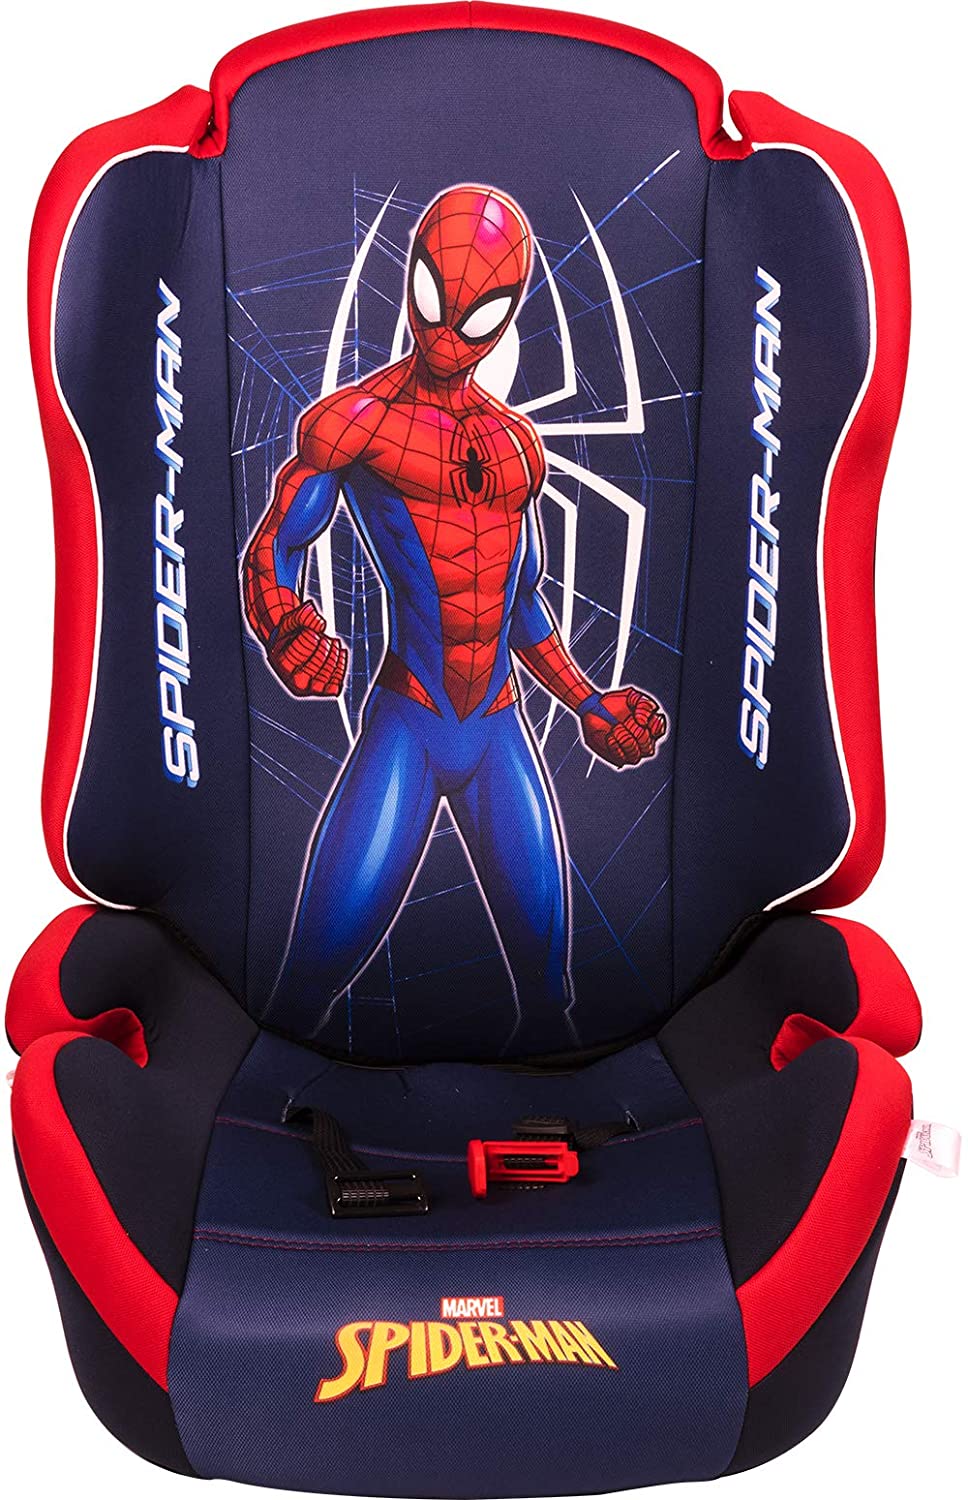 Marvel ORIO Spiderman Group 2-3 Car Seat (from 15 to 36 kg) Red